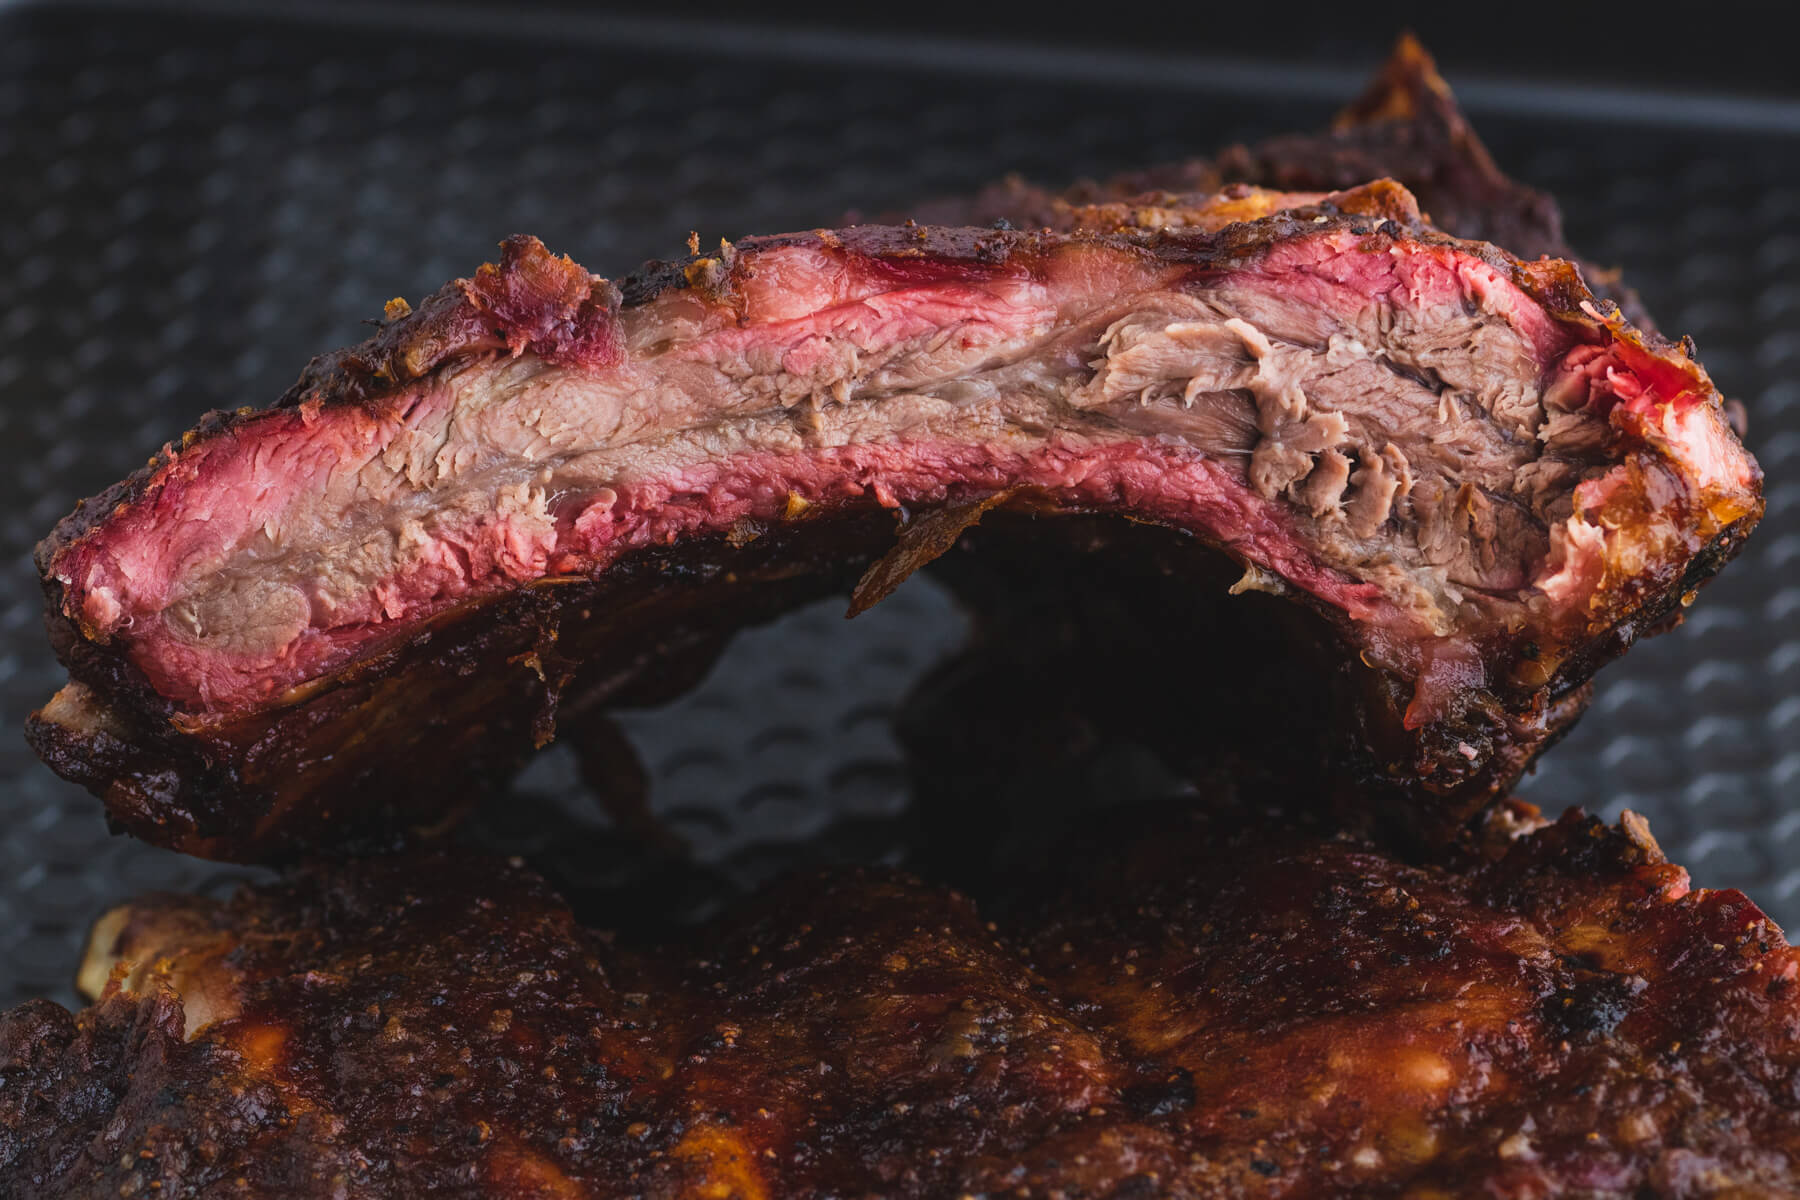 A side view of a smoked beef back rib showing the vibrant smoke ring.